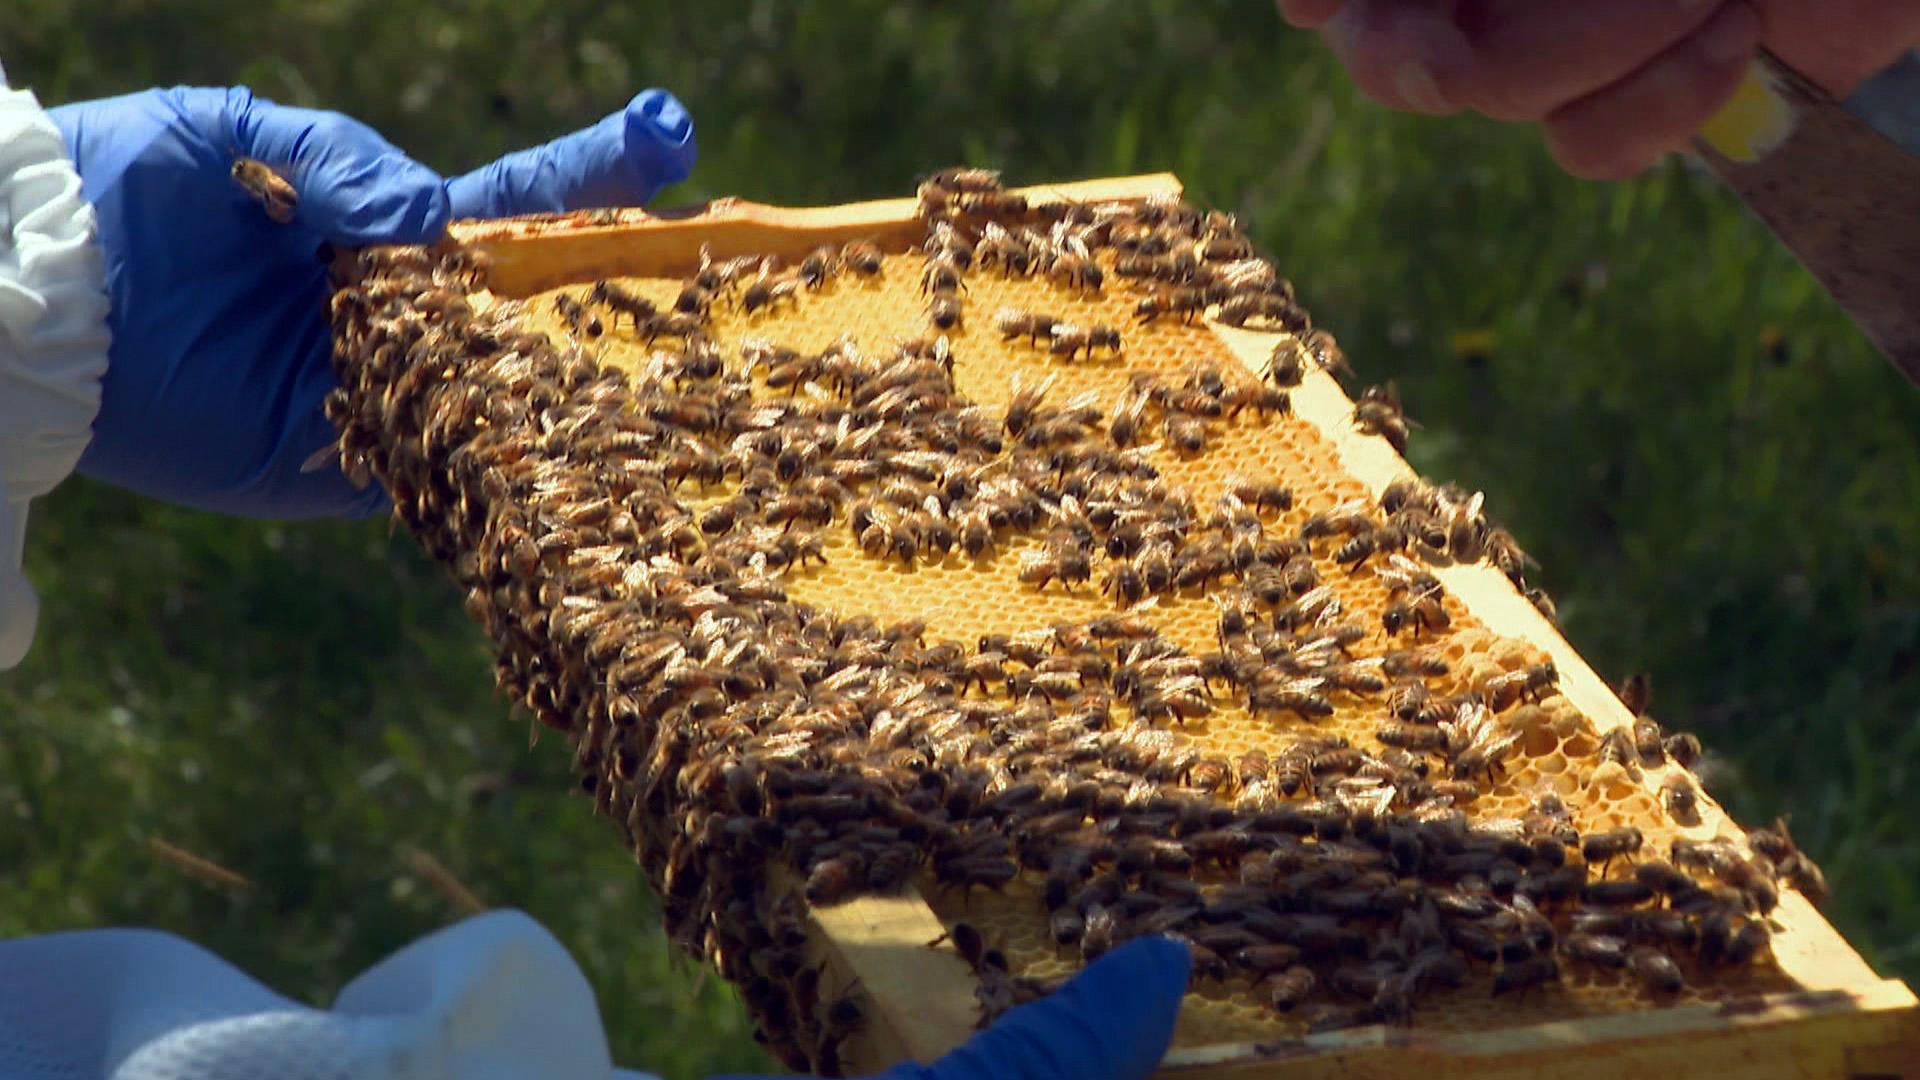 Karen and Jim Belli say the secret ot their honey is the diversity of the local trees and plants in northeastern Illinois, making it in their view one of the best places to raise honeybees in the entire country. (WTTW News)